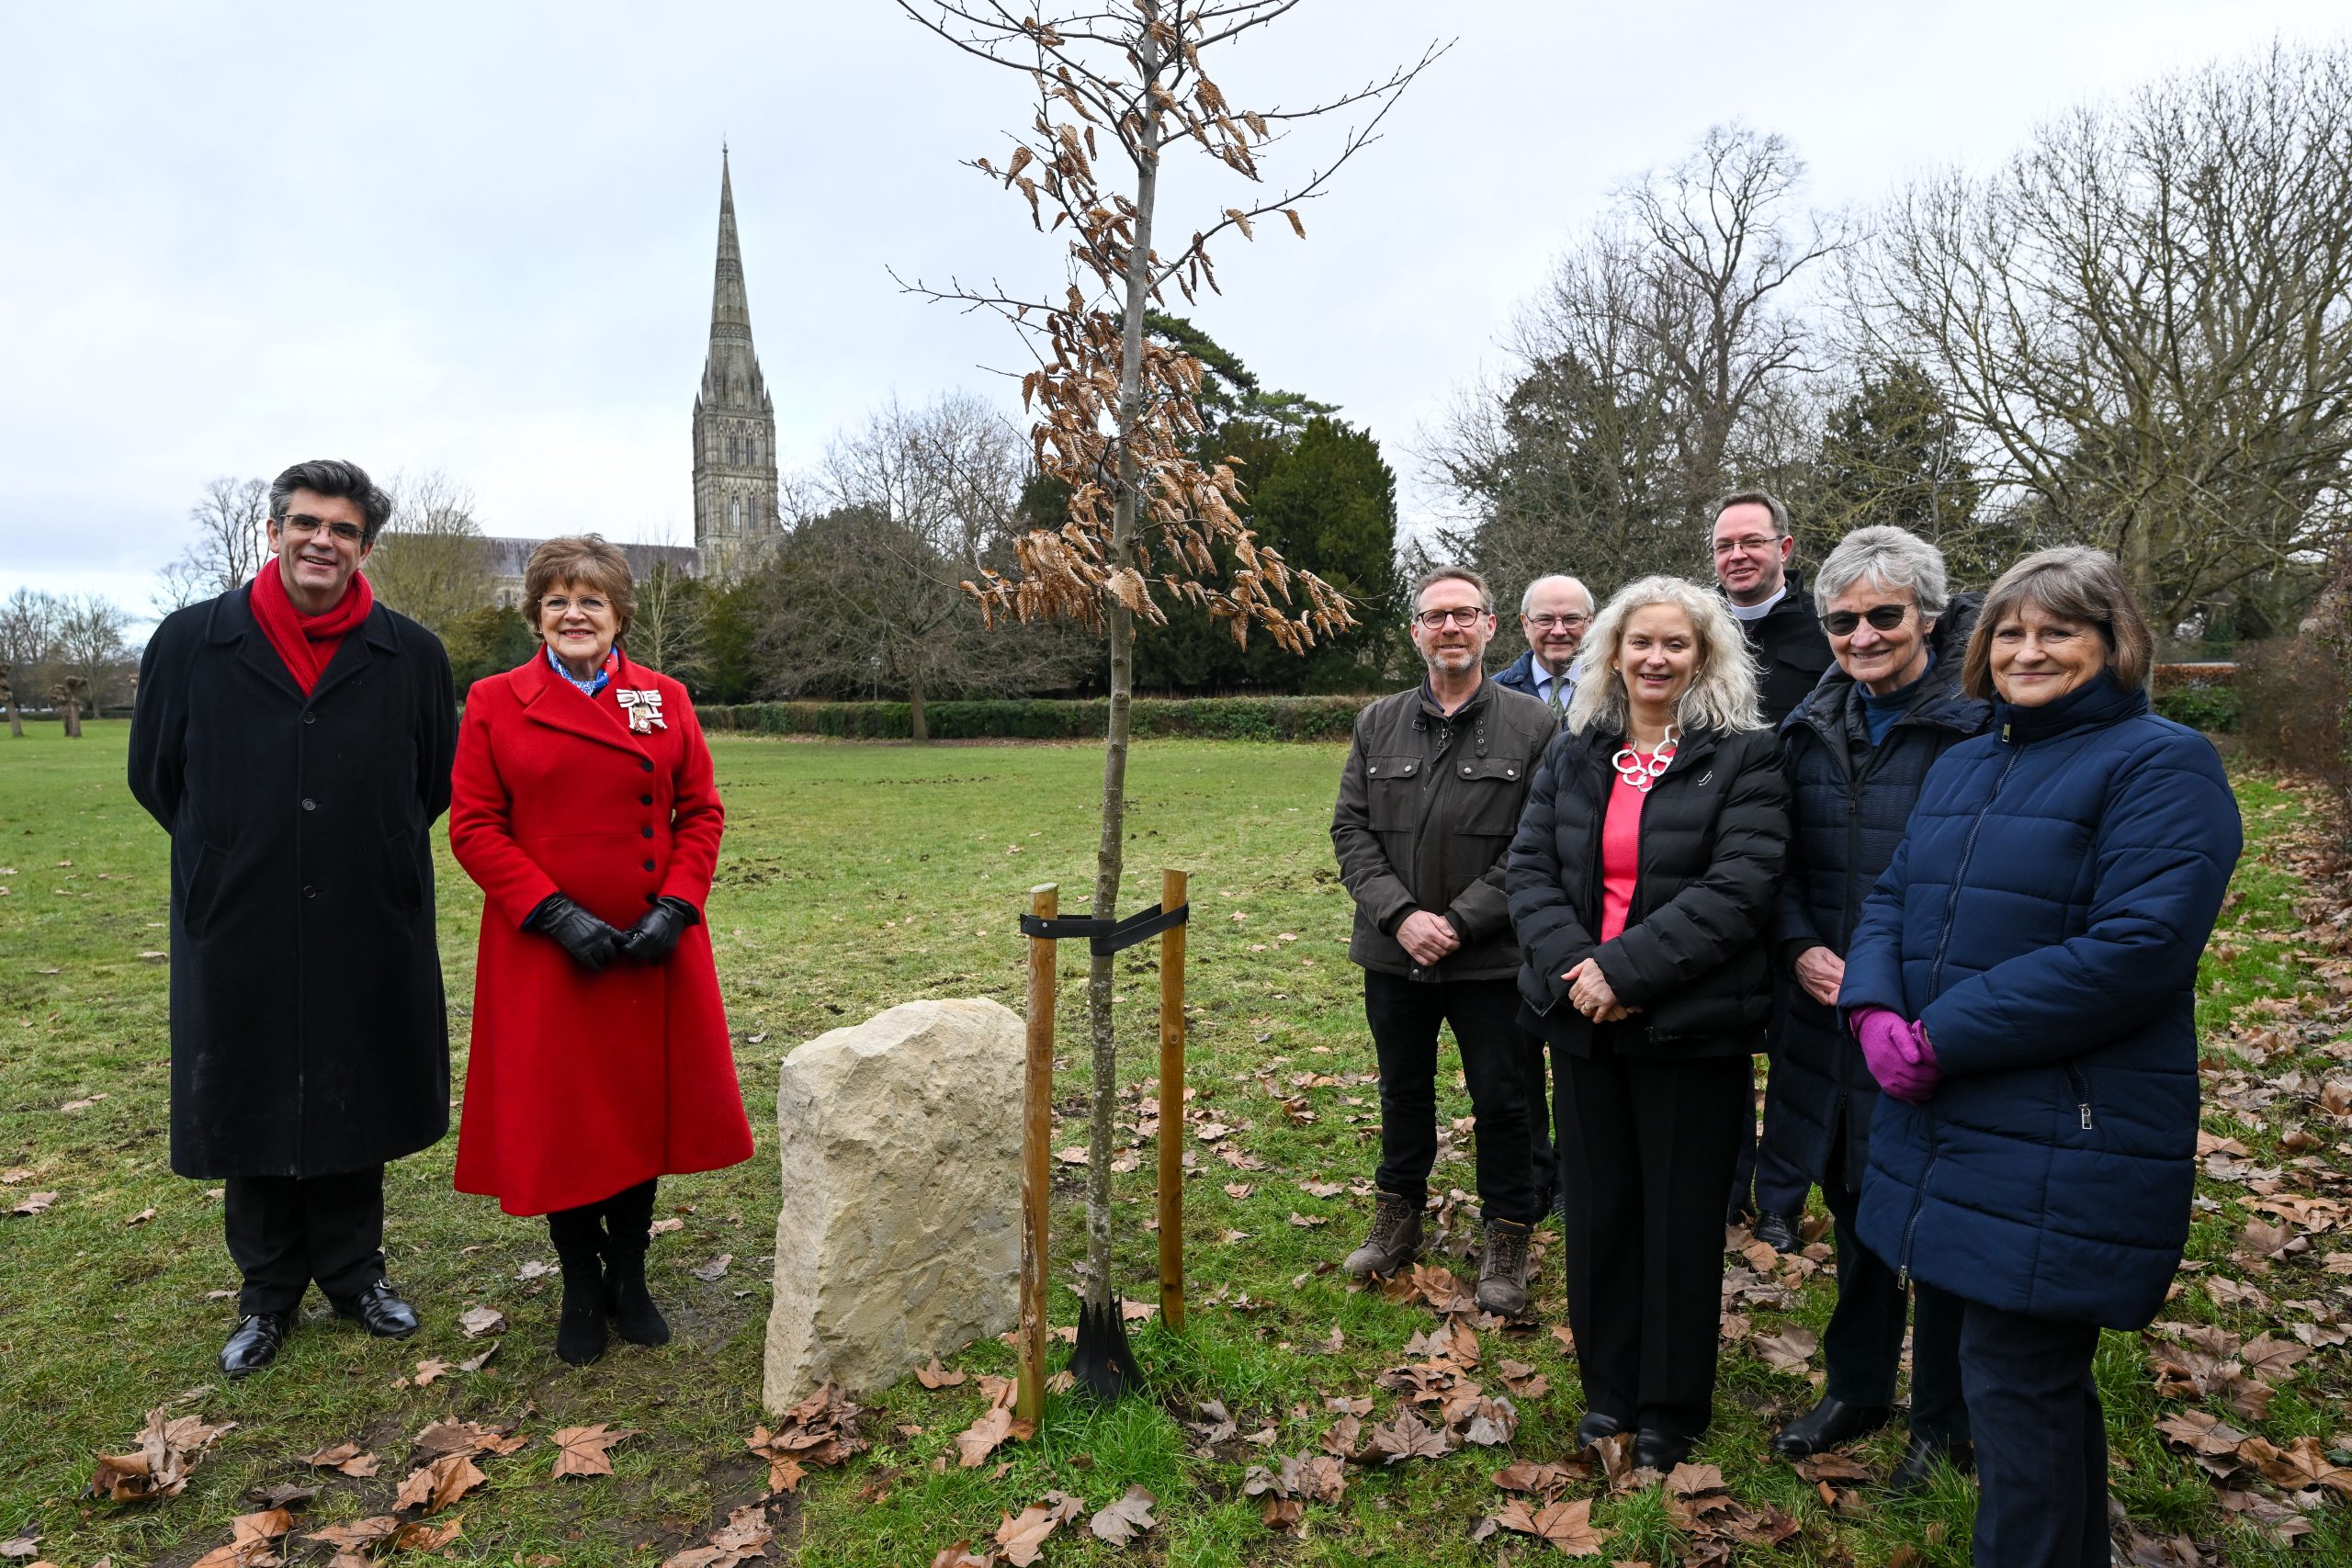 Lord-Lieutenant of Wiltshire unveils a plaque marking Cathedral’s Queens Green Canopy planting